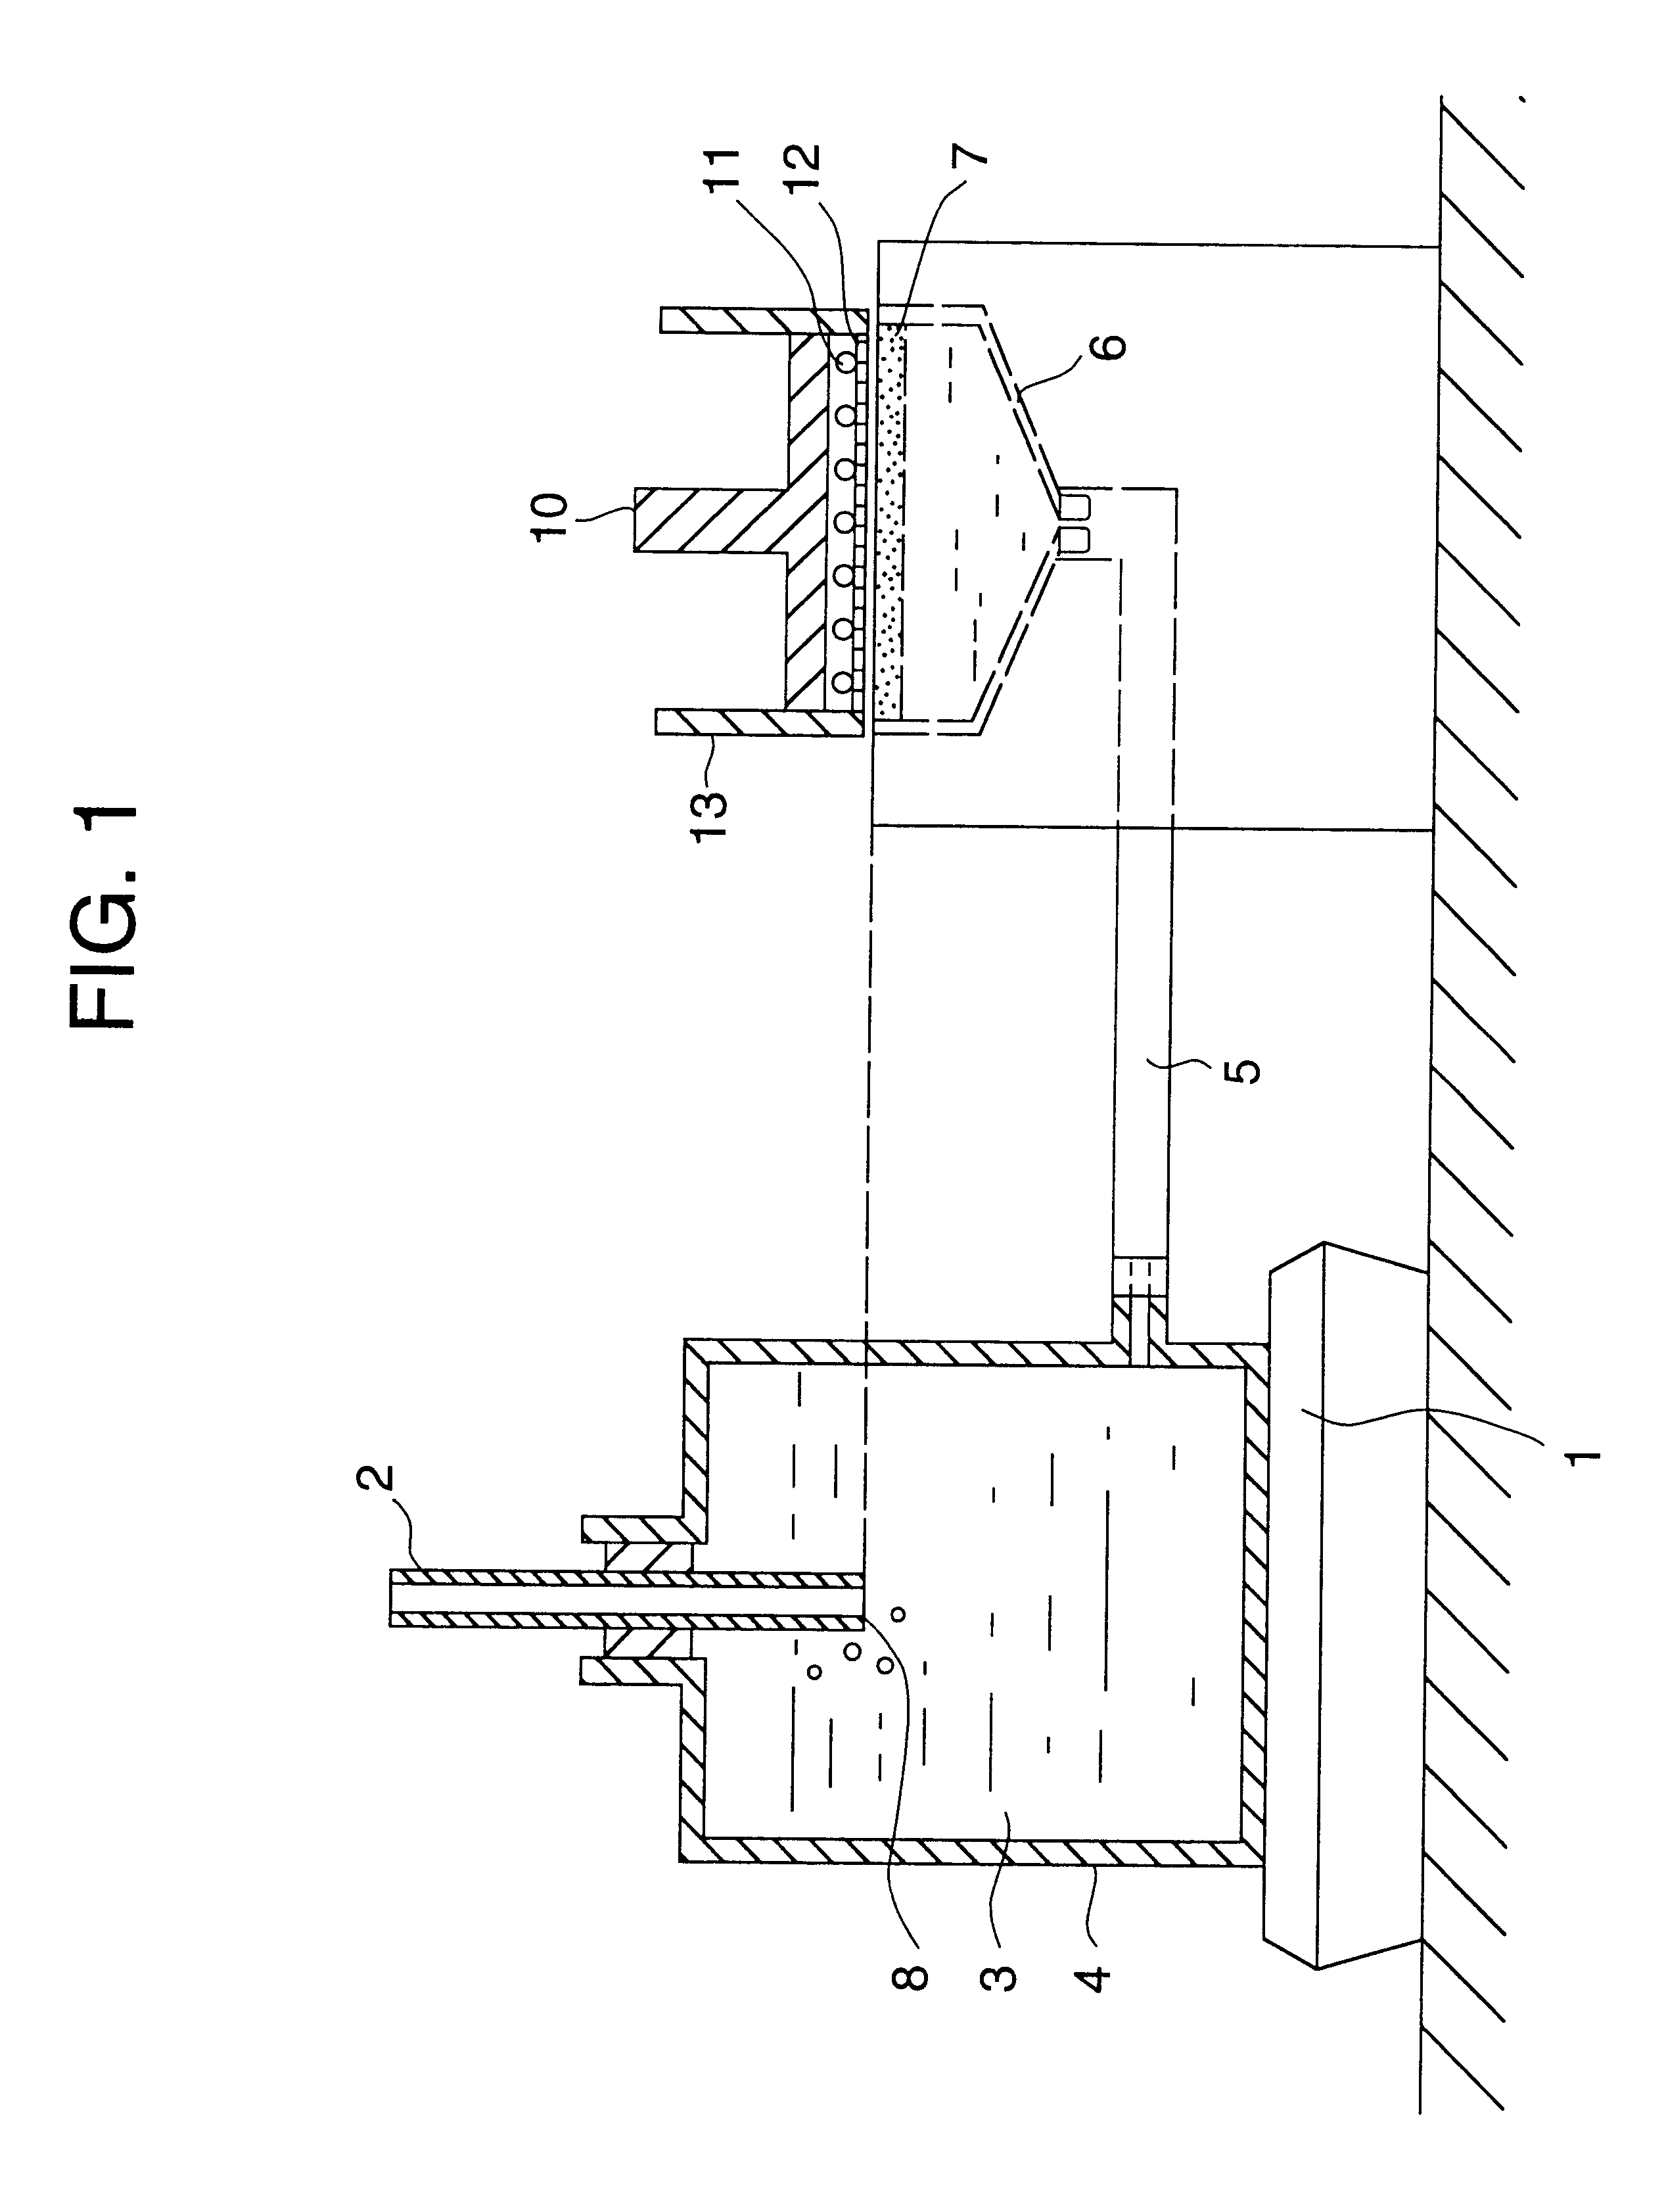 Water-absorbing resin and process for producing same